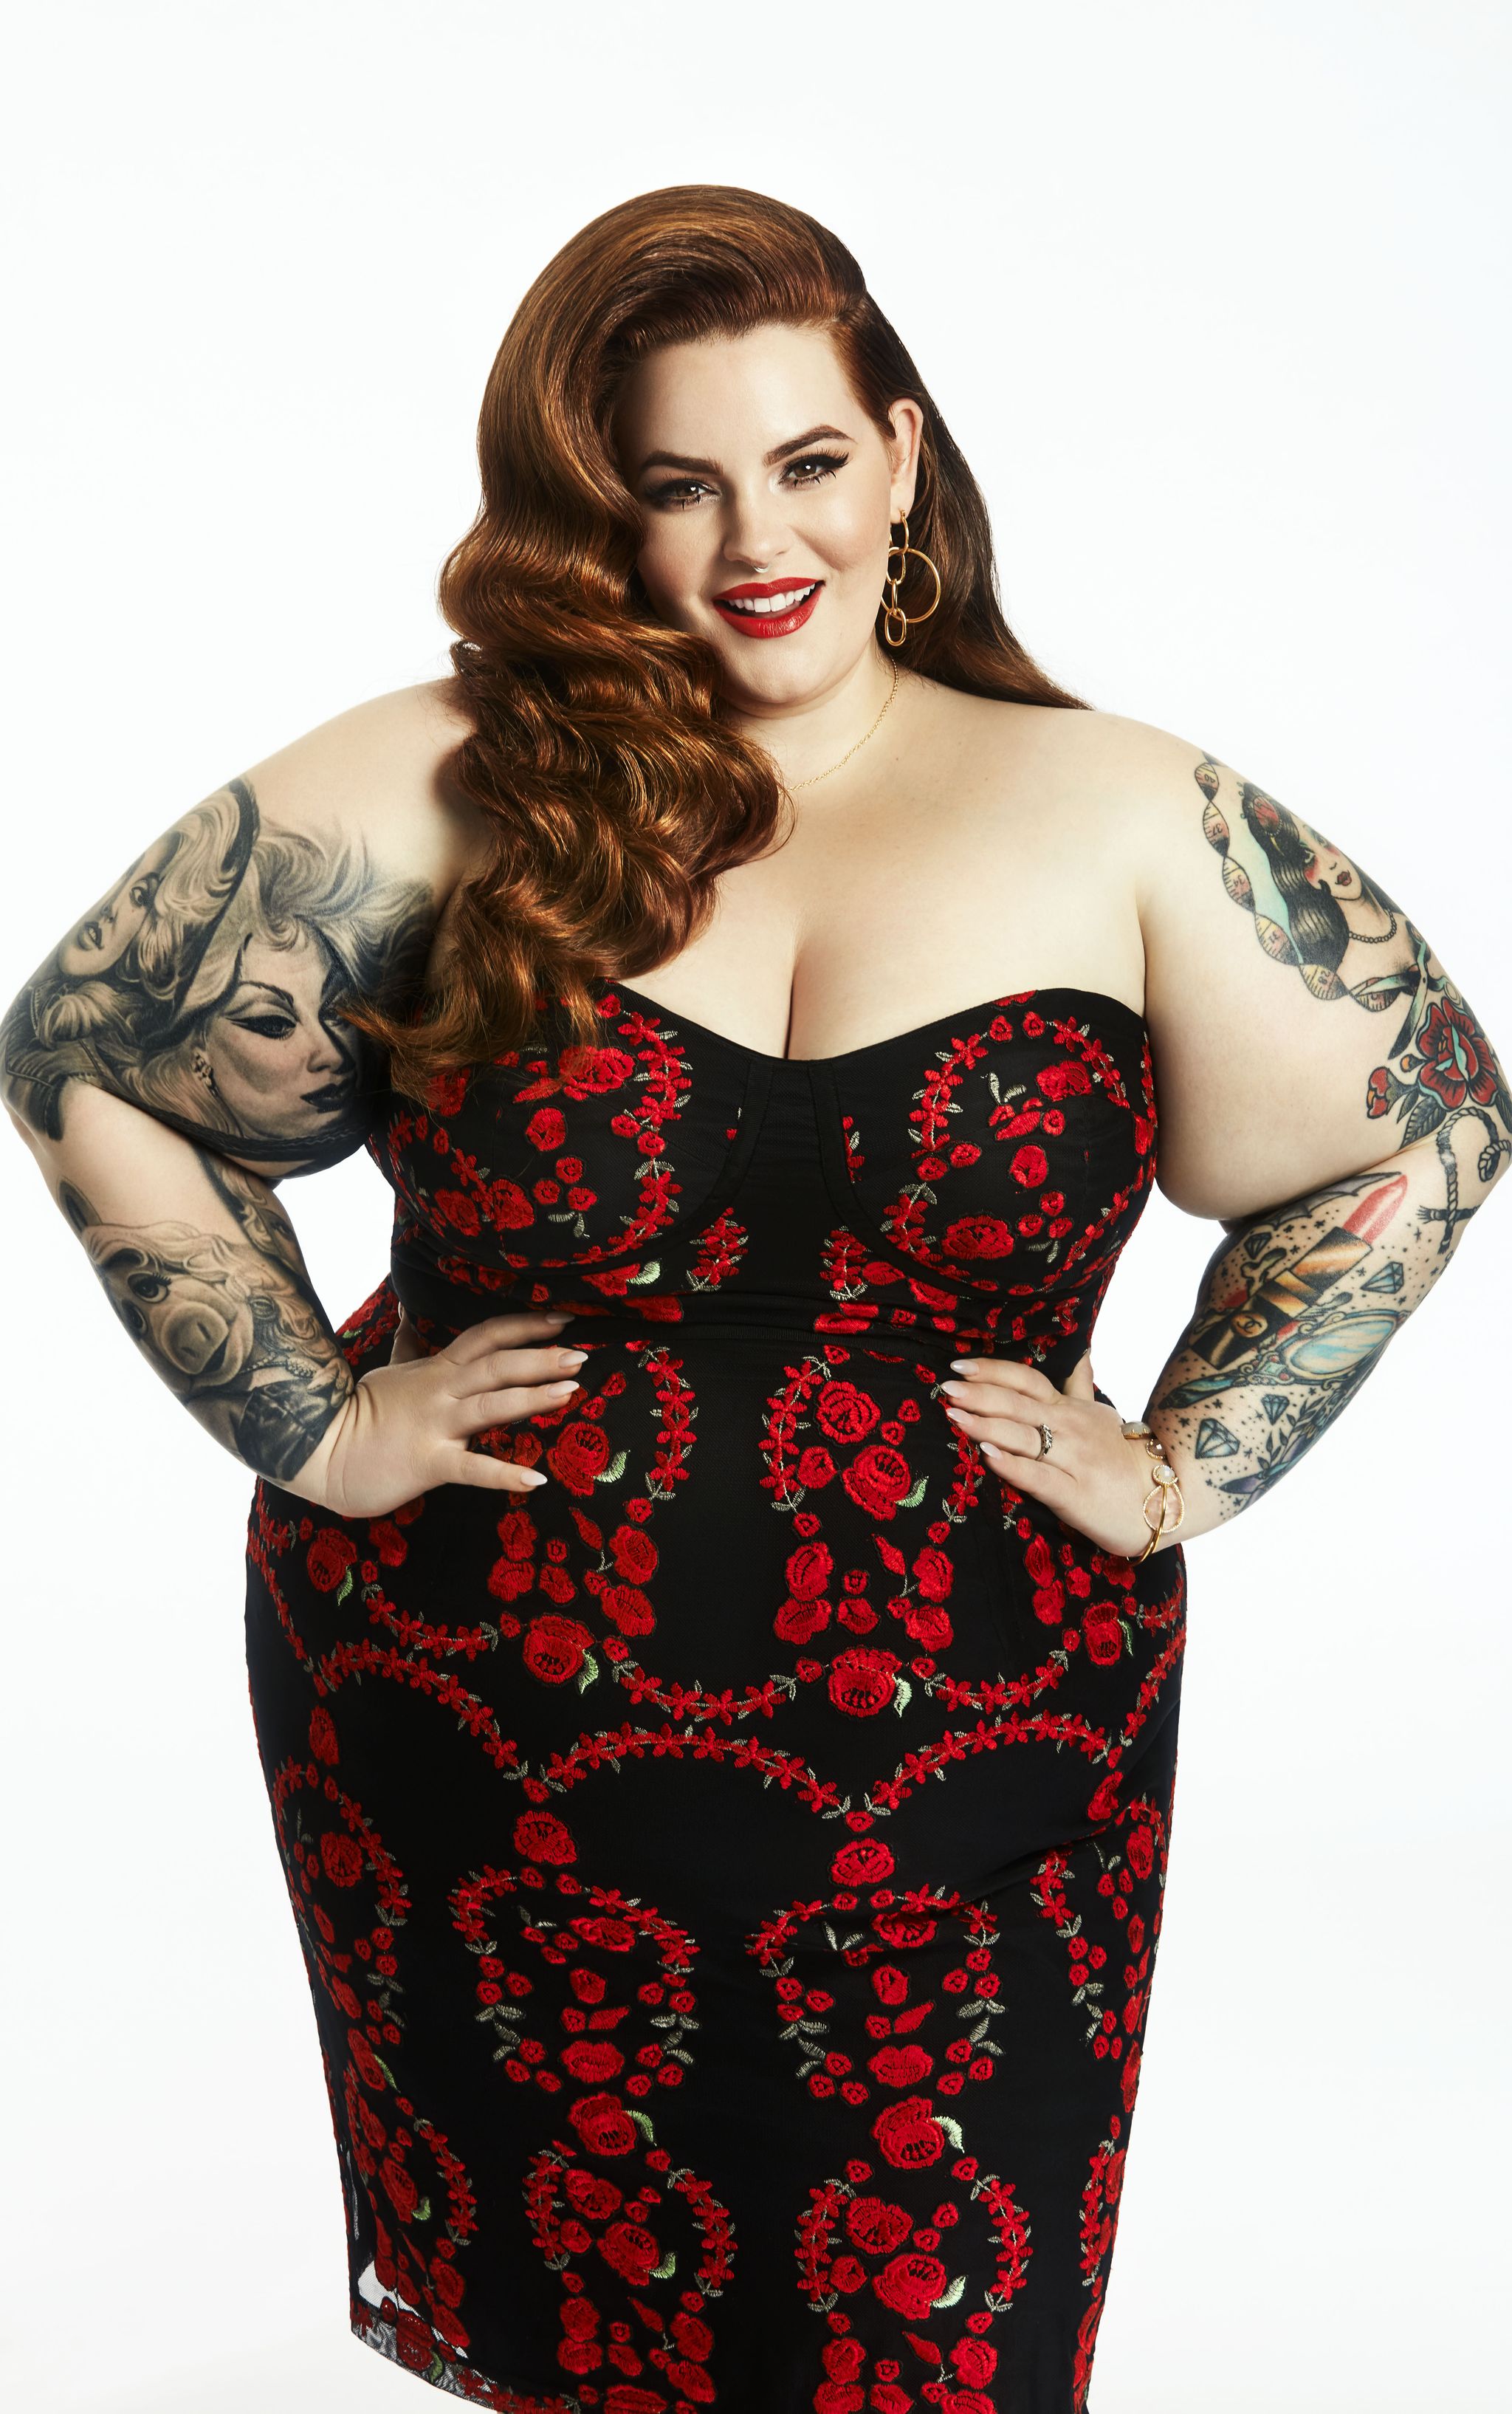 Tess Holliday plus size instagram model book